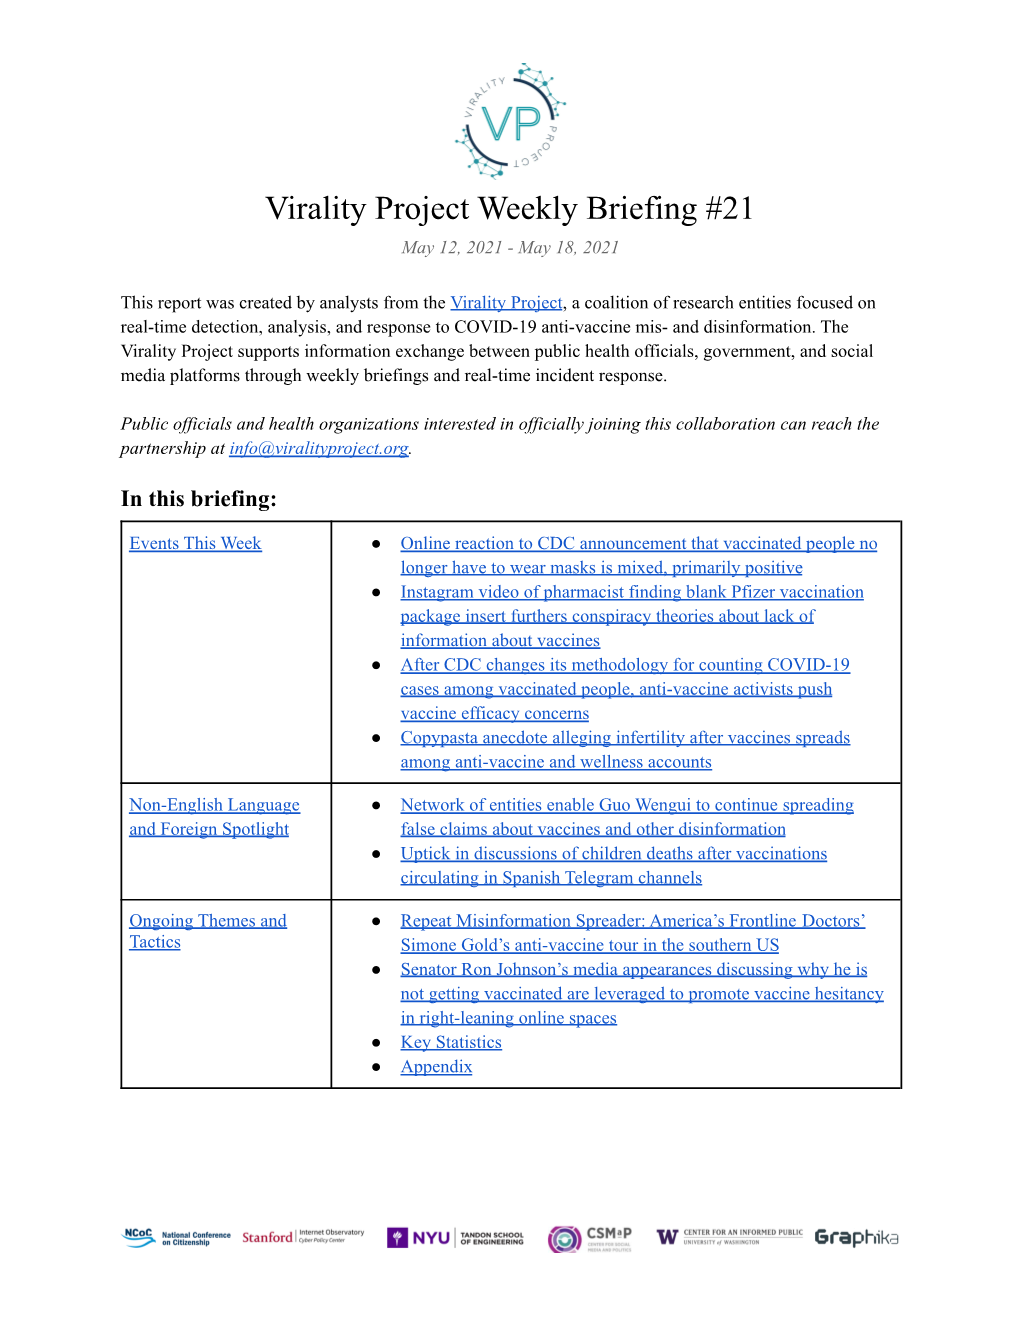 Virality Project Weekly Briefing 21